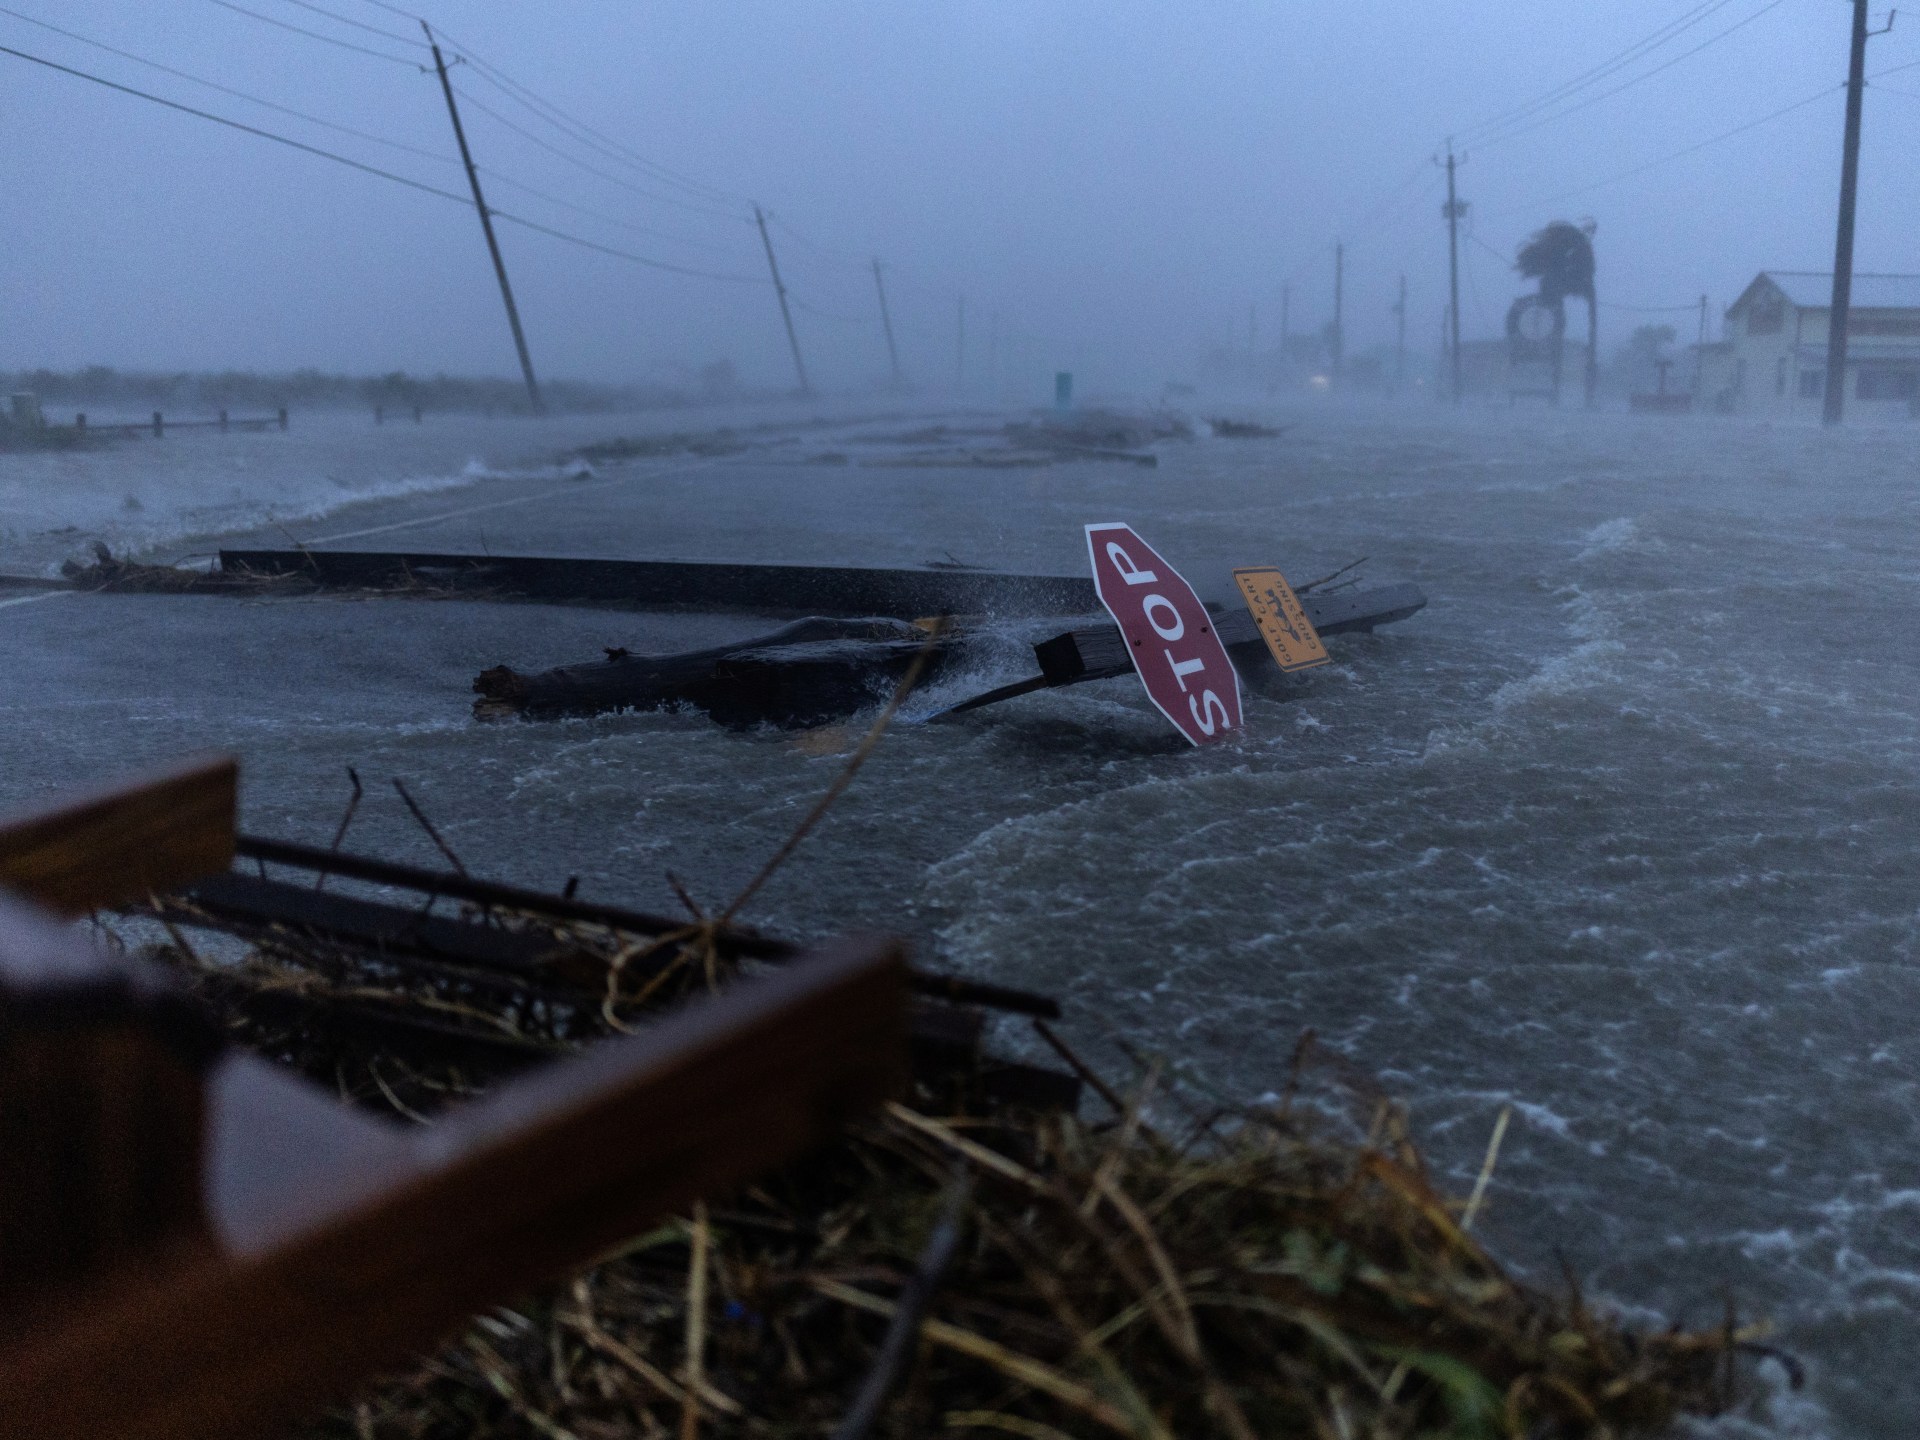 Texas energy firms assess damage after Hurricane Beryl batters Gulf Coast | Business and Economy News